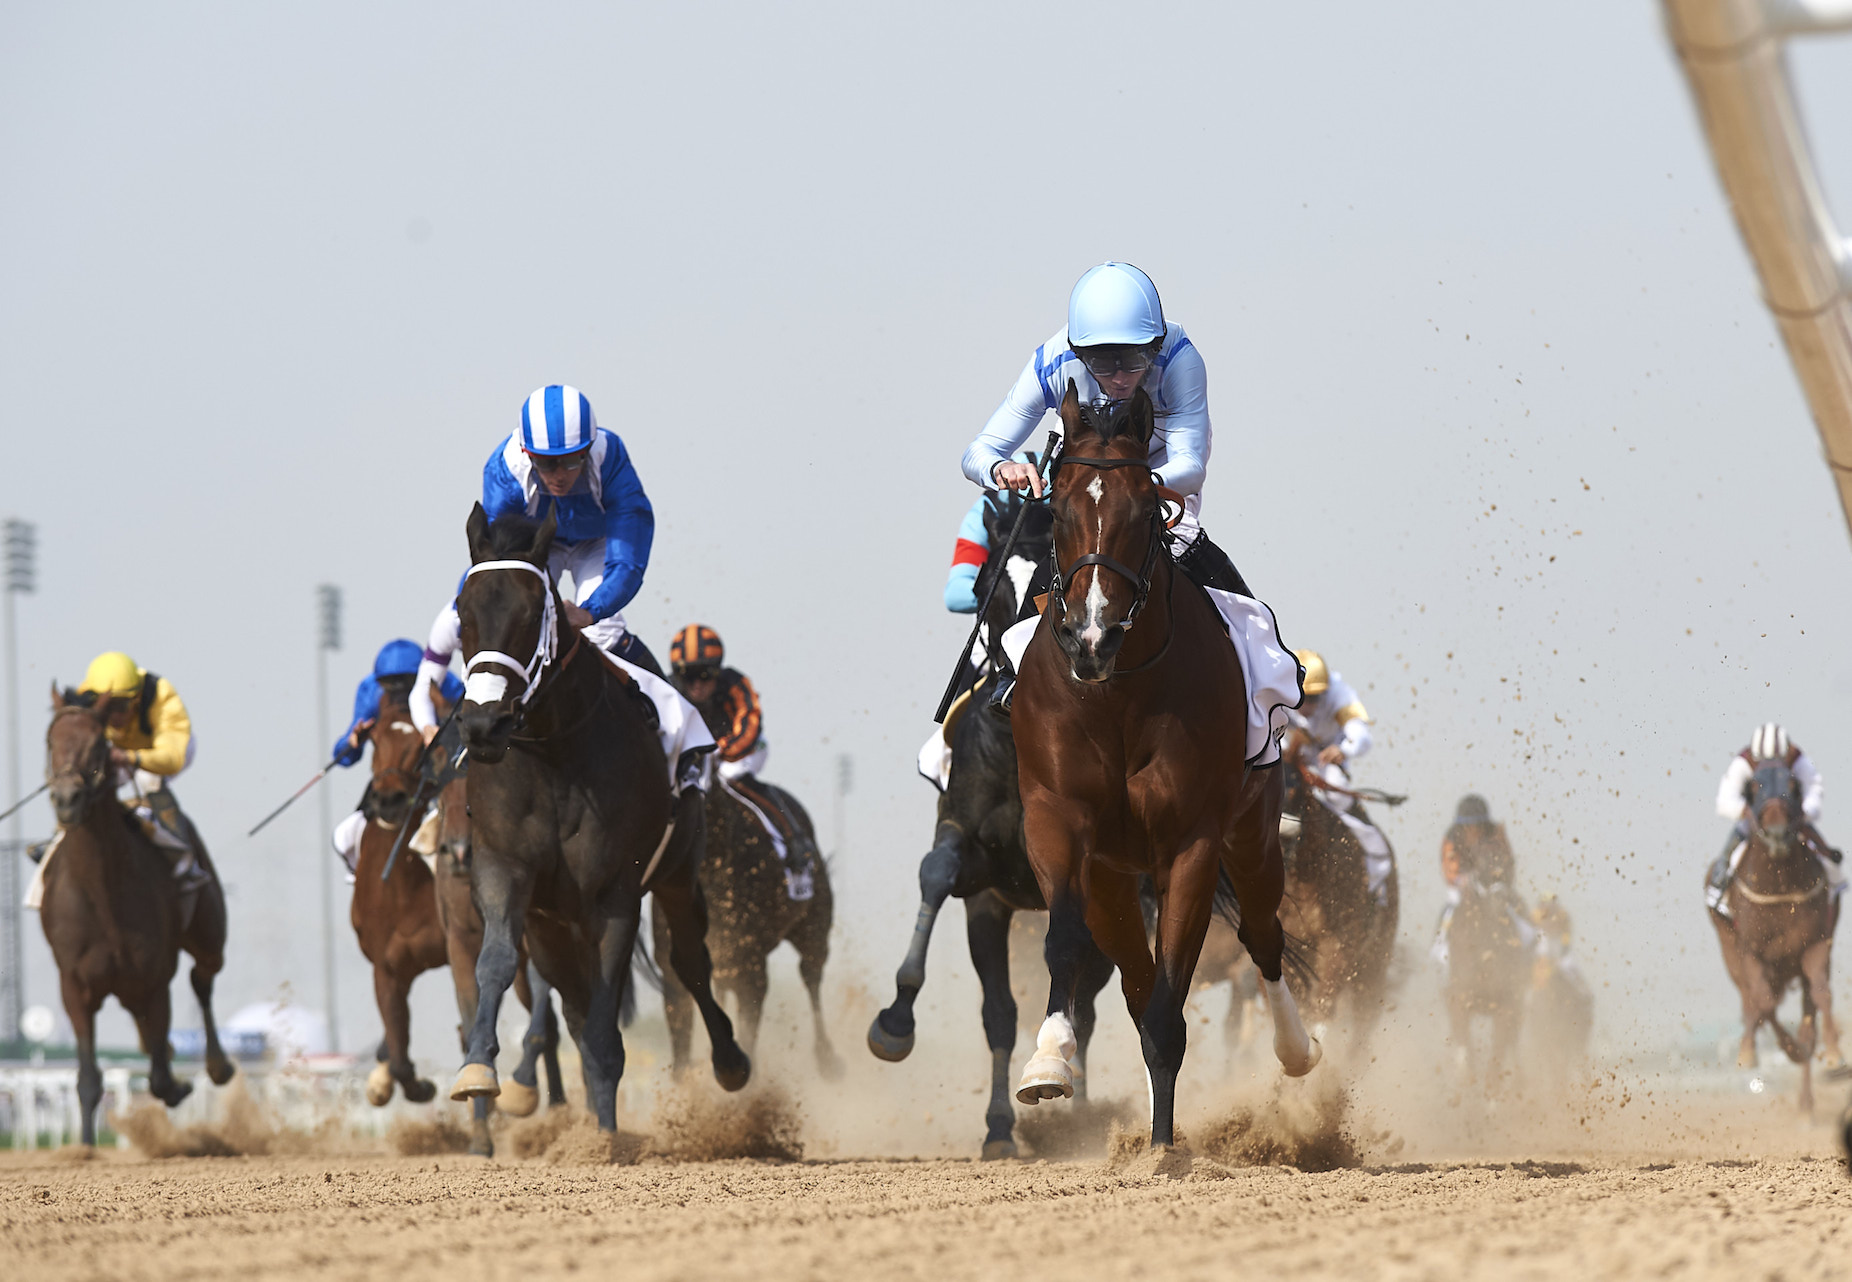 Ryan Moore (pale blue cap) took Heavy Metal into the lead soon after the gate opened in the Godolphin Mile, stuck to the inside and never looked like being beaten. Photo: Dubai Racing Club/Andrew Watkins